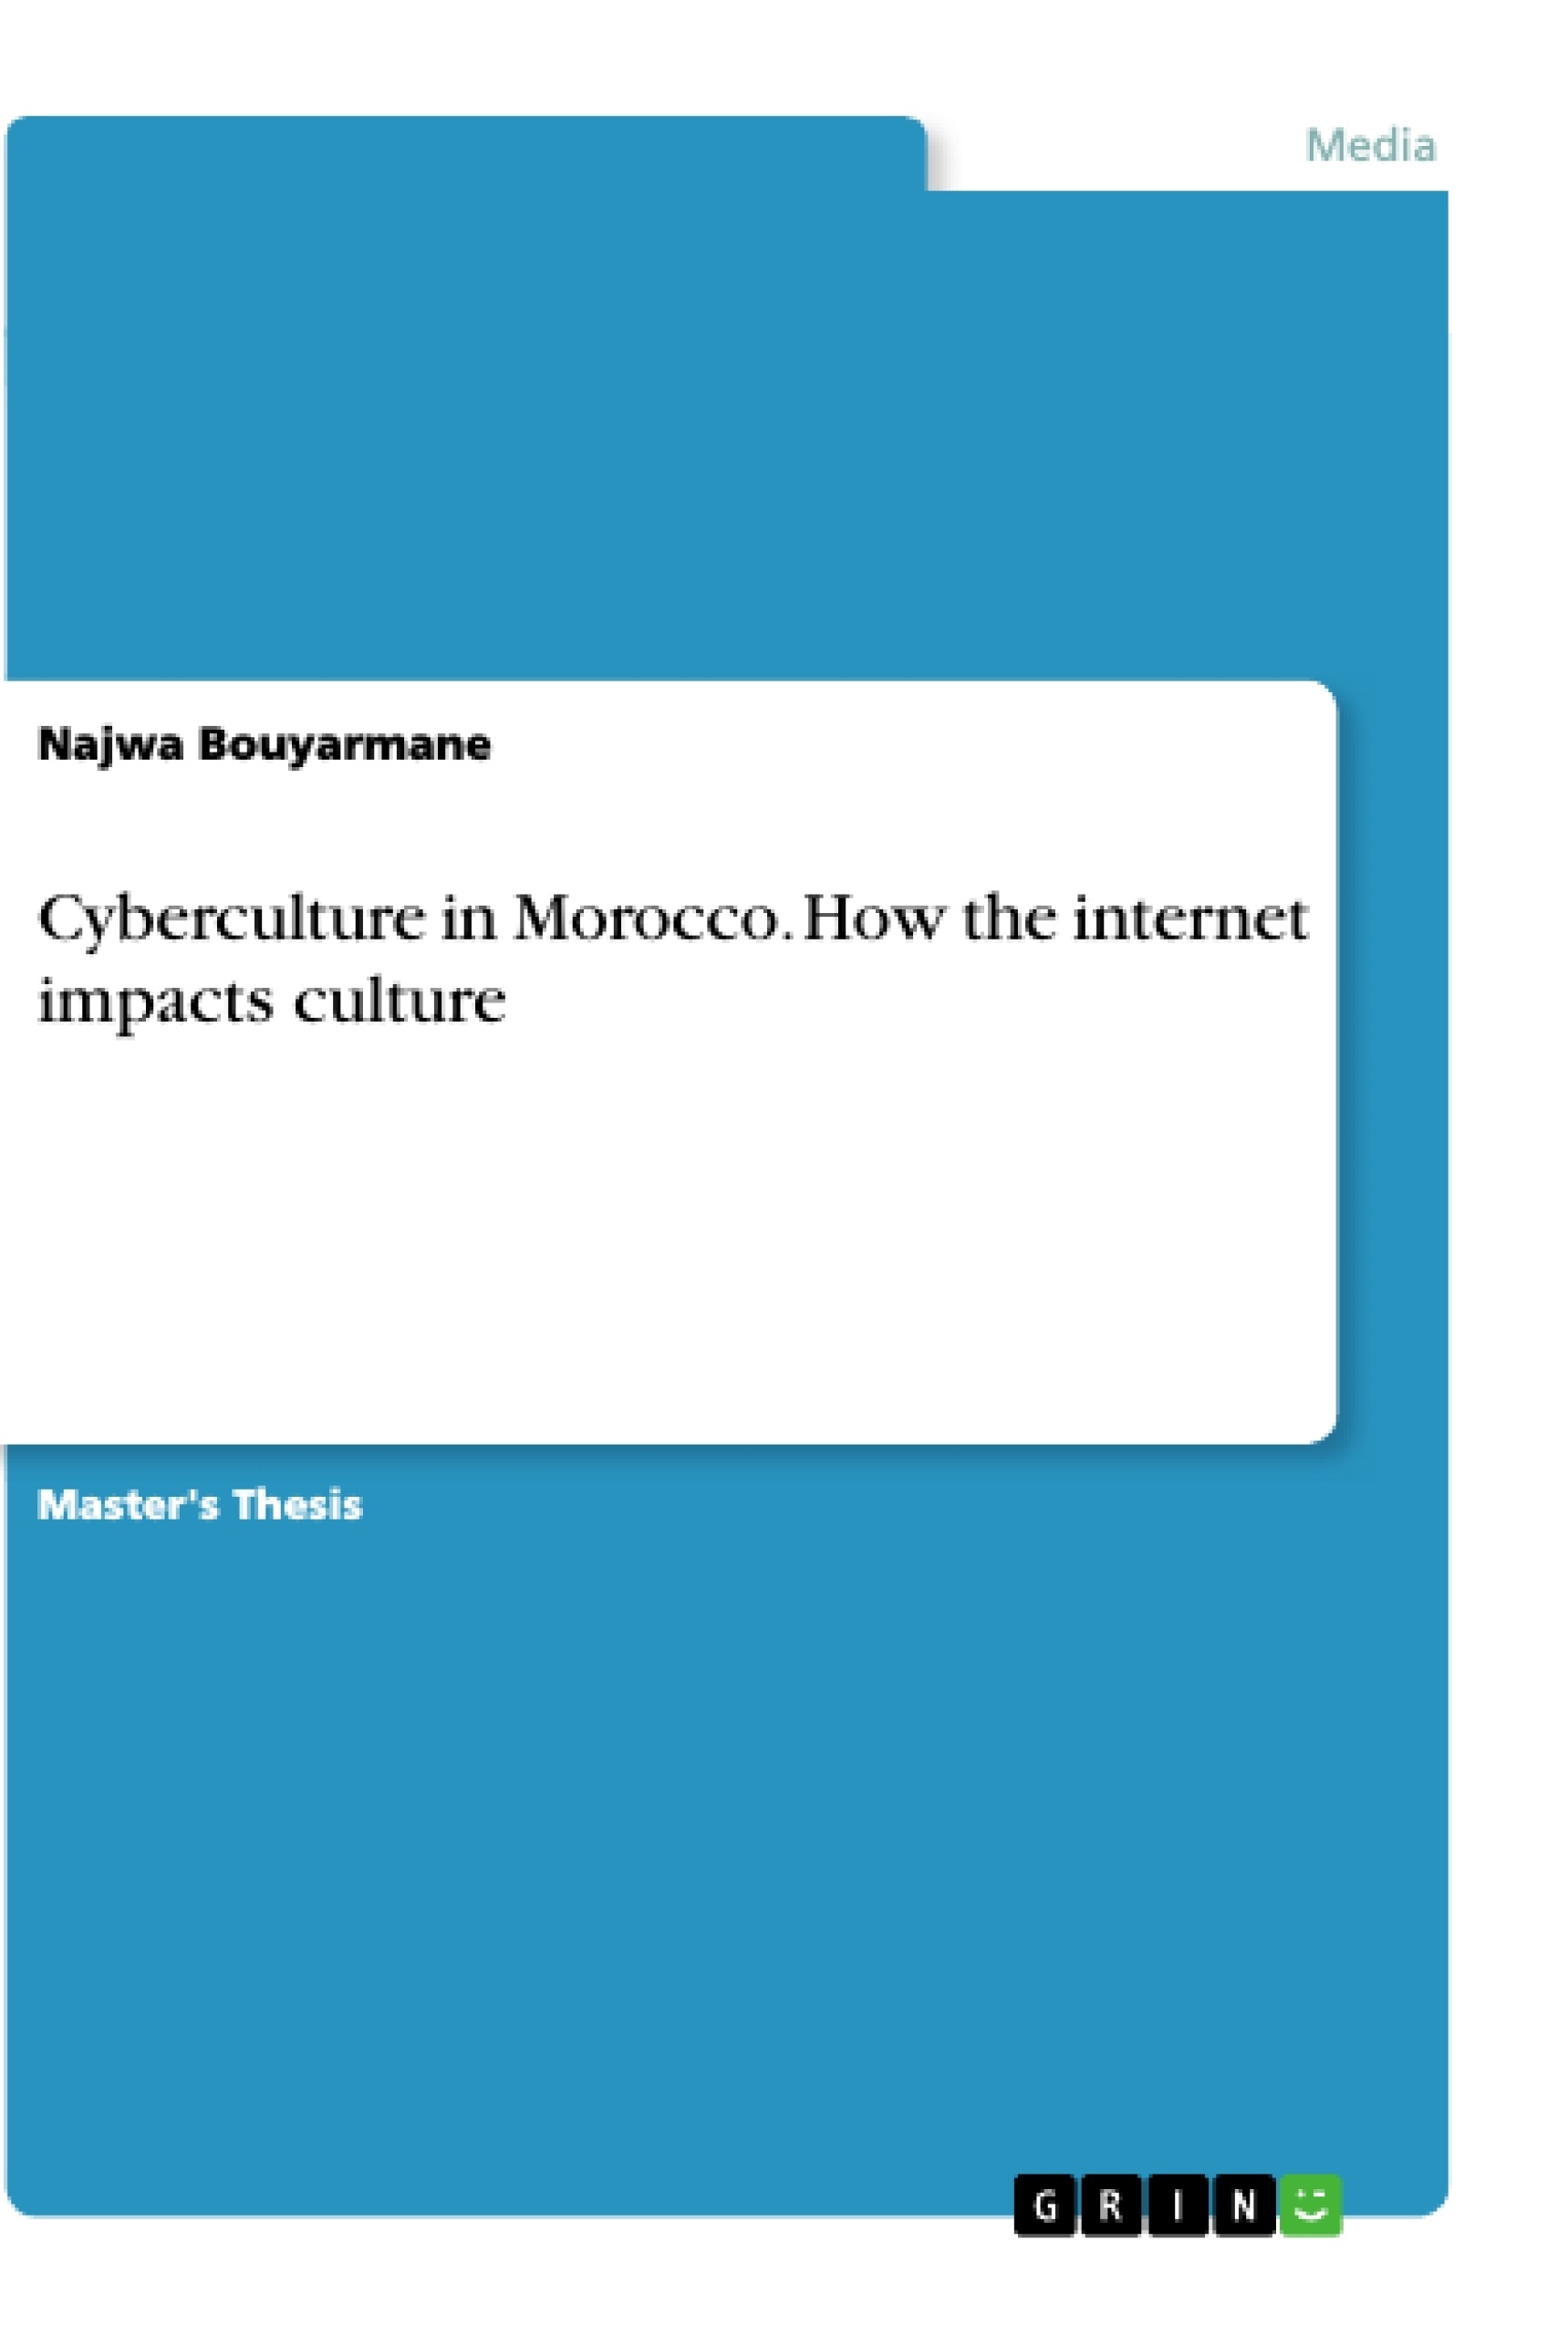 Título: Cyberculture in Morocco. How the internet impacts culture